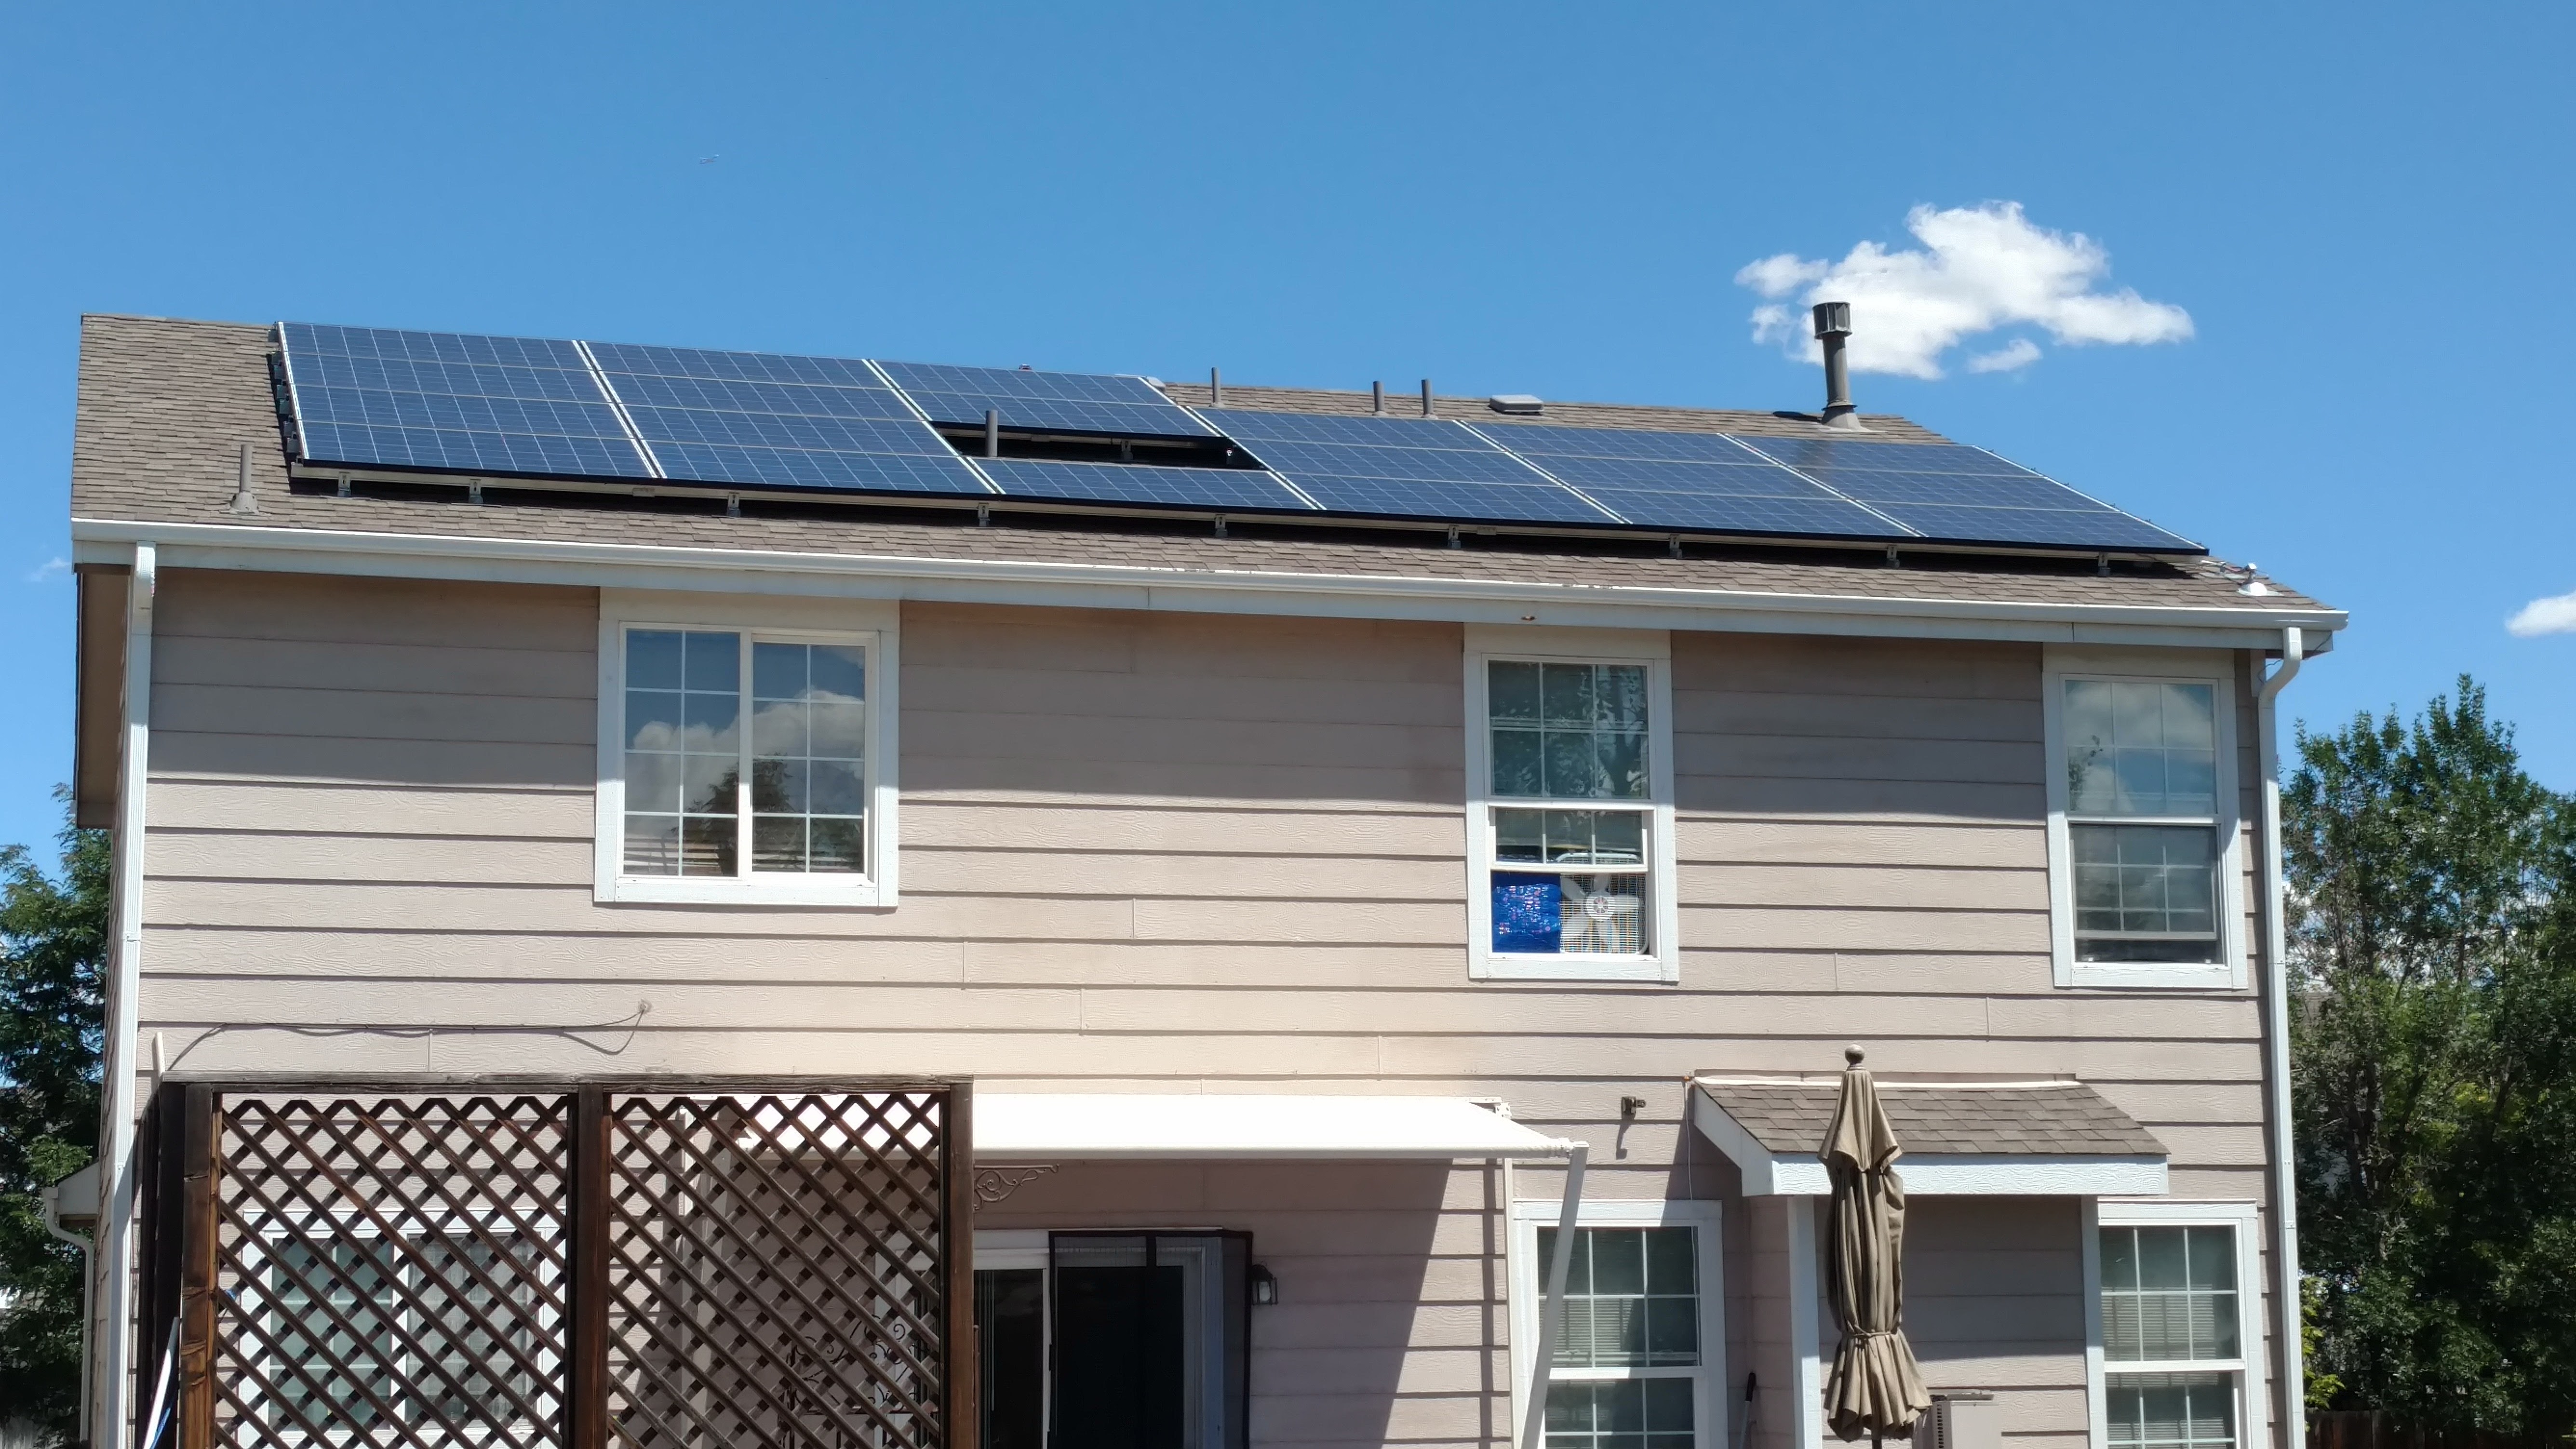 5-benefits-of-solar-panels-every-homeowner-needs-to-experience